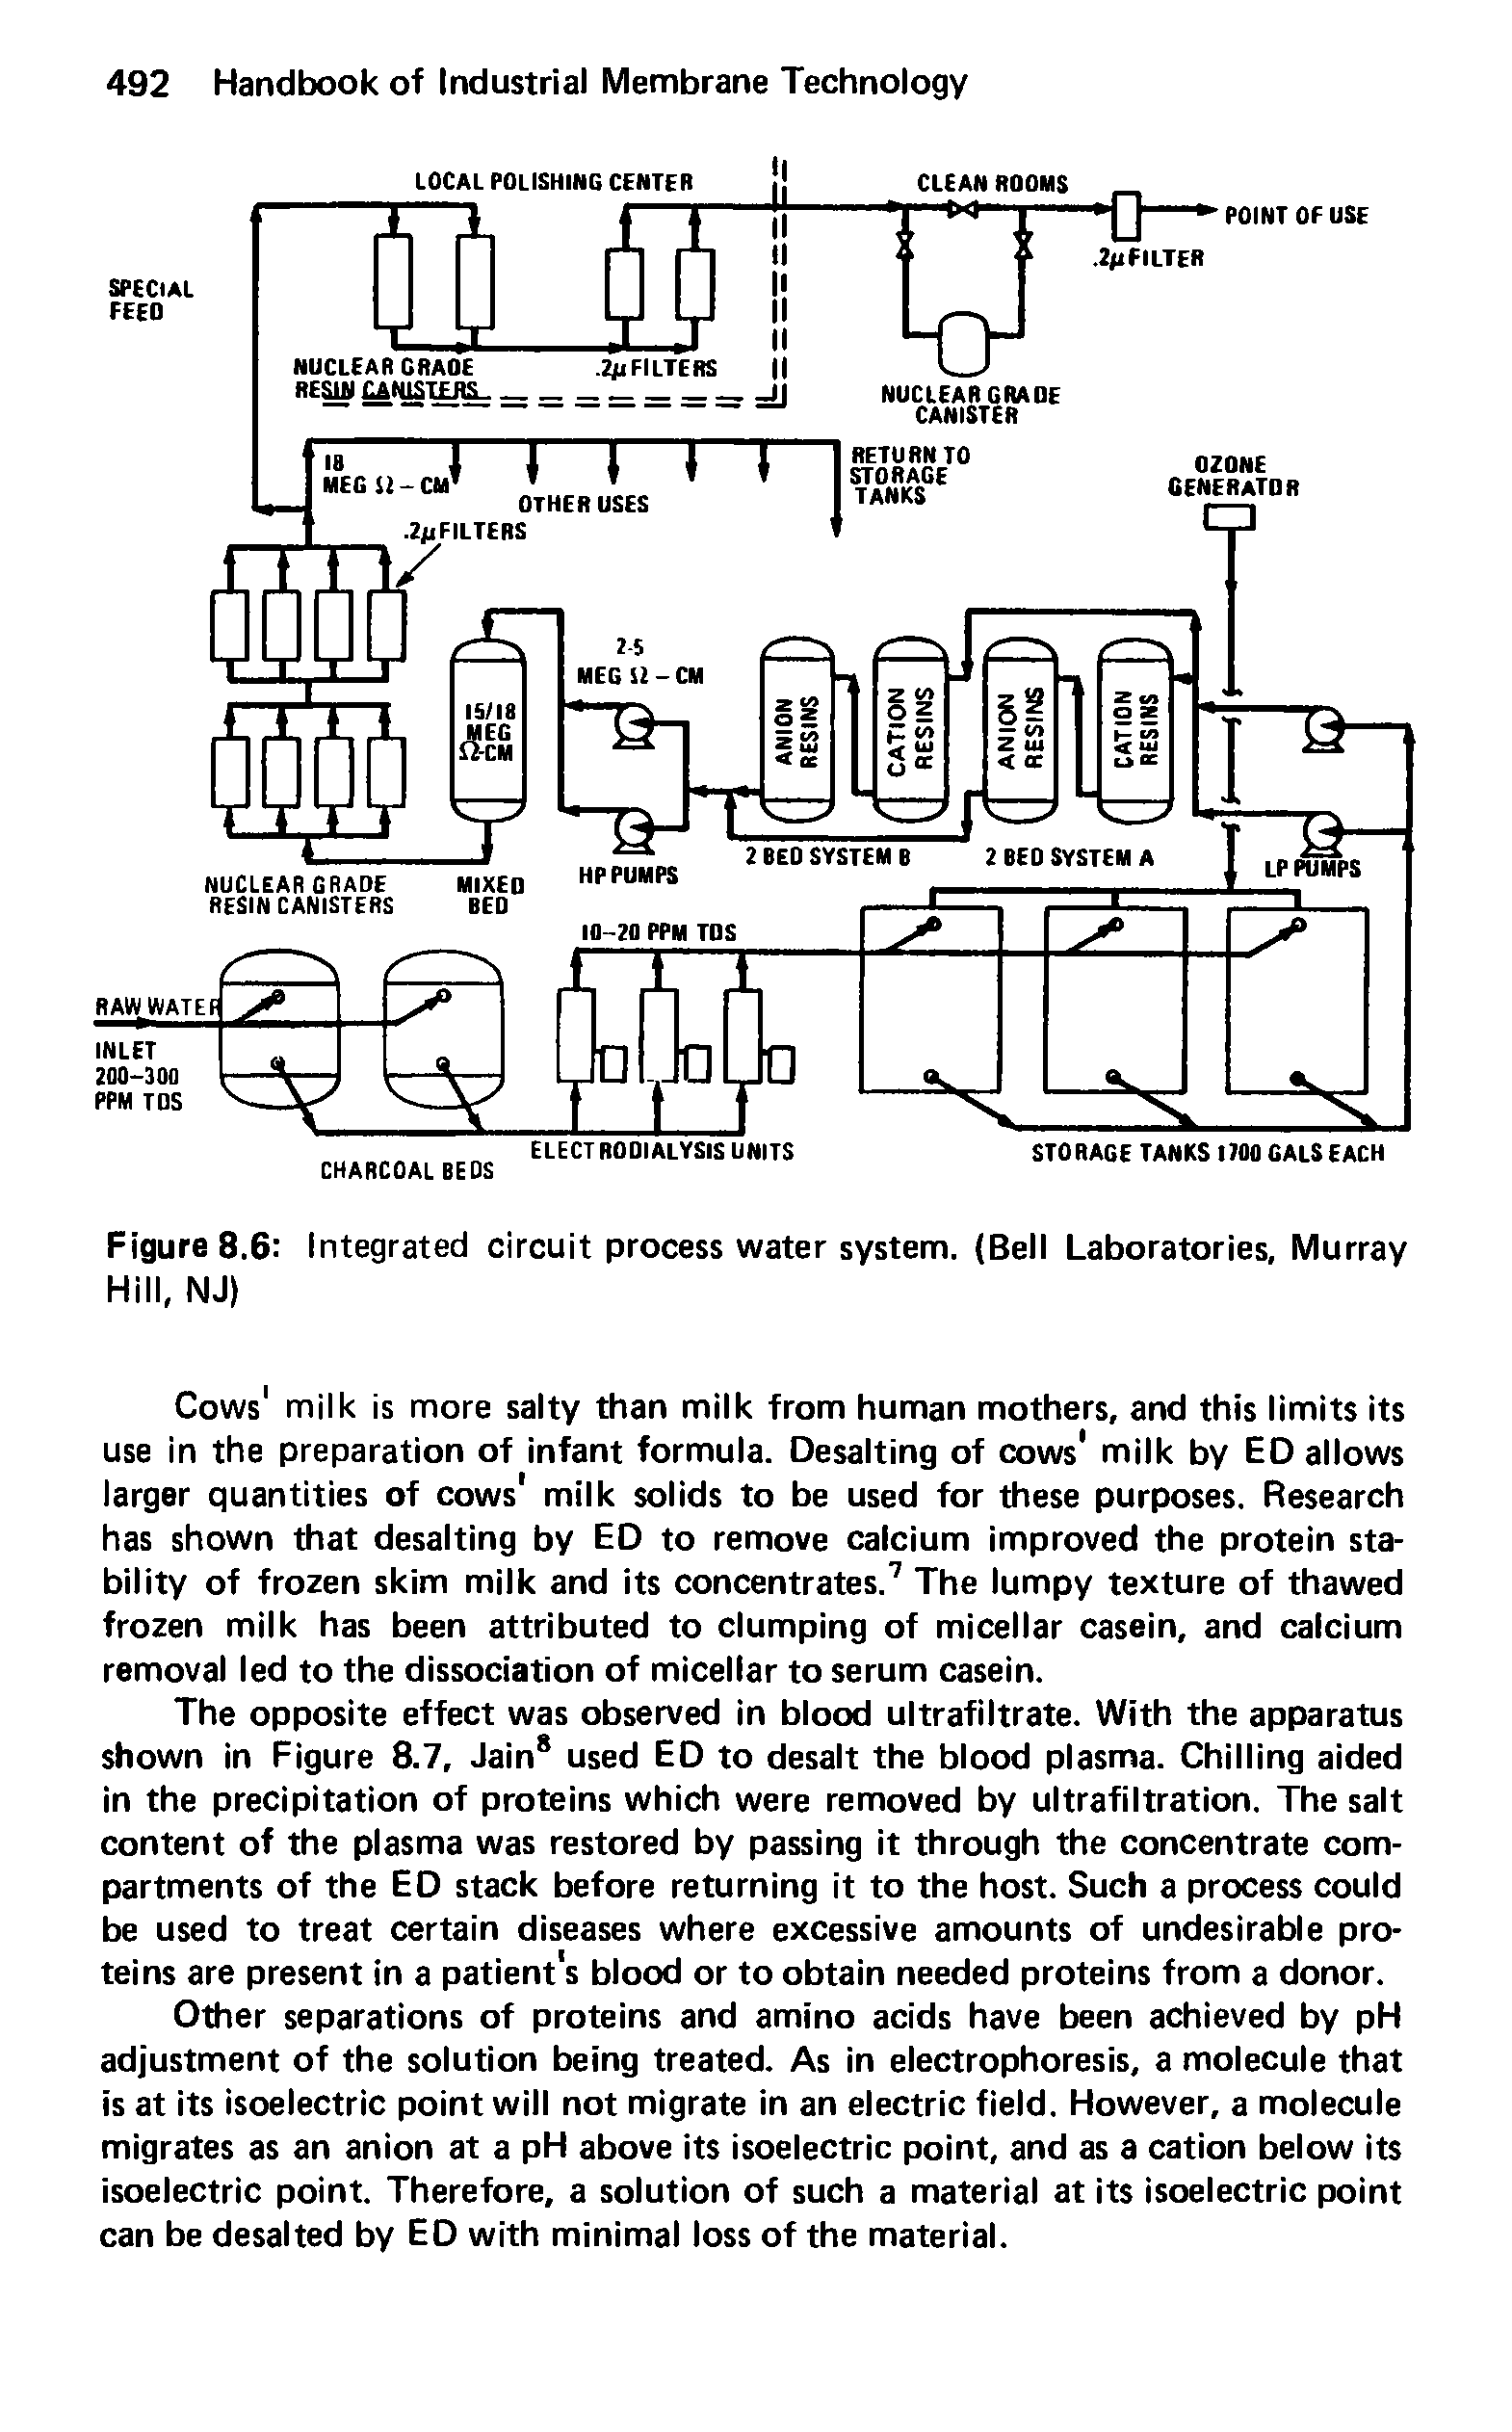 Figure 8.6 Integrated circuit process water system. (Bell Laboratories, Murray Hill, NJ)...